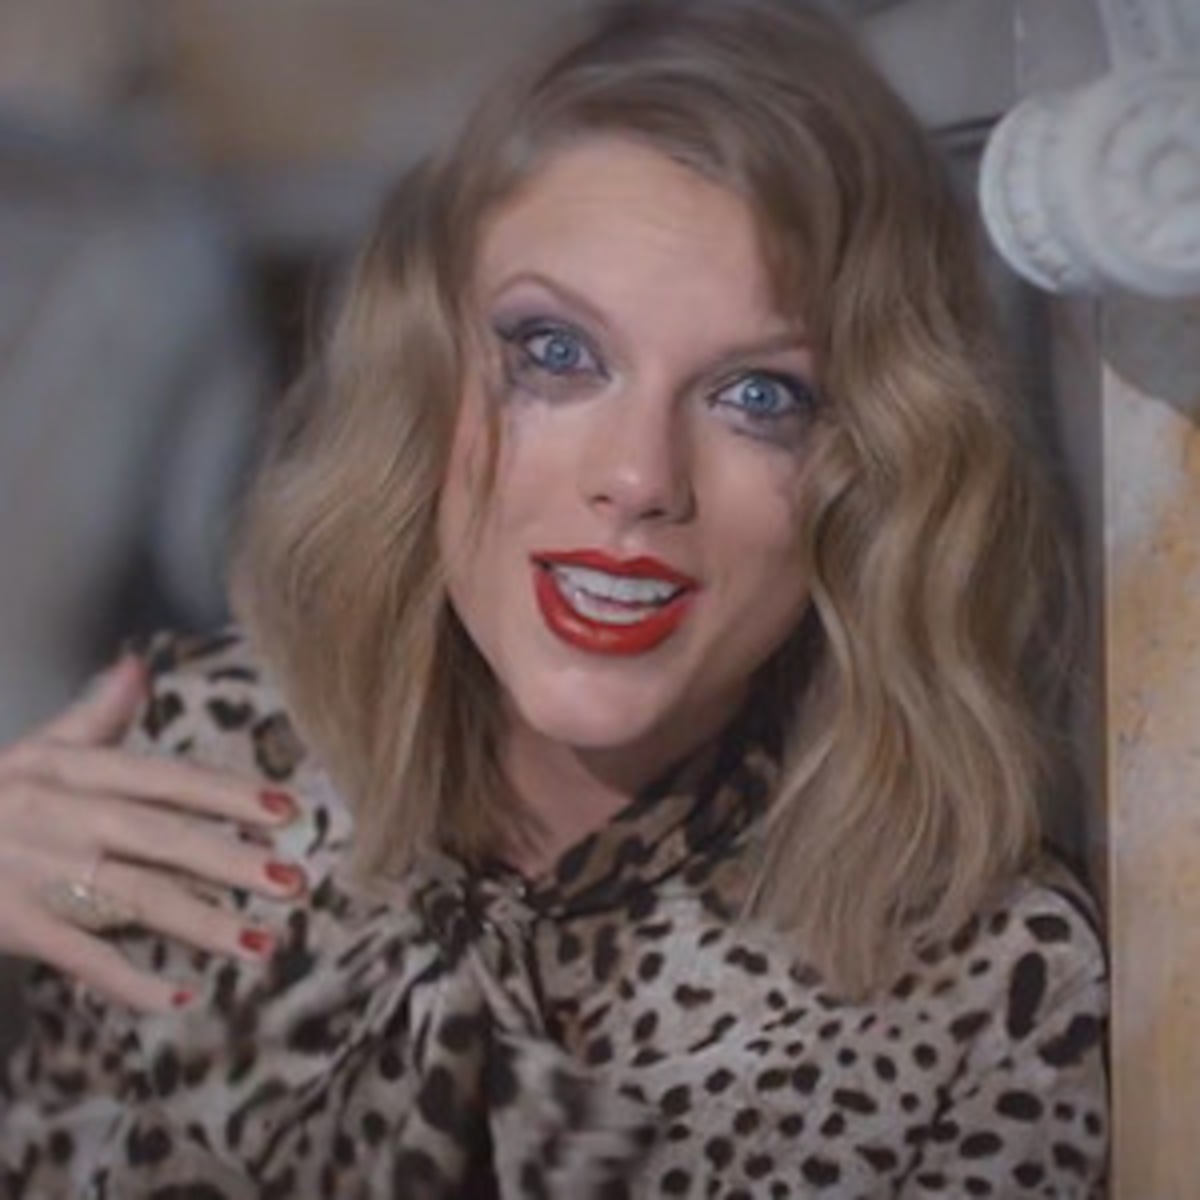 16 Times Taylors Blank Space Video Made Us Fear Her E News